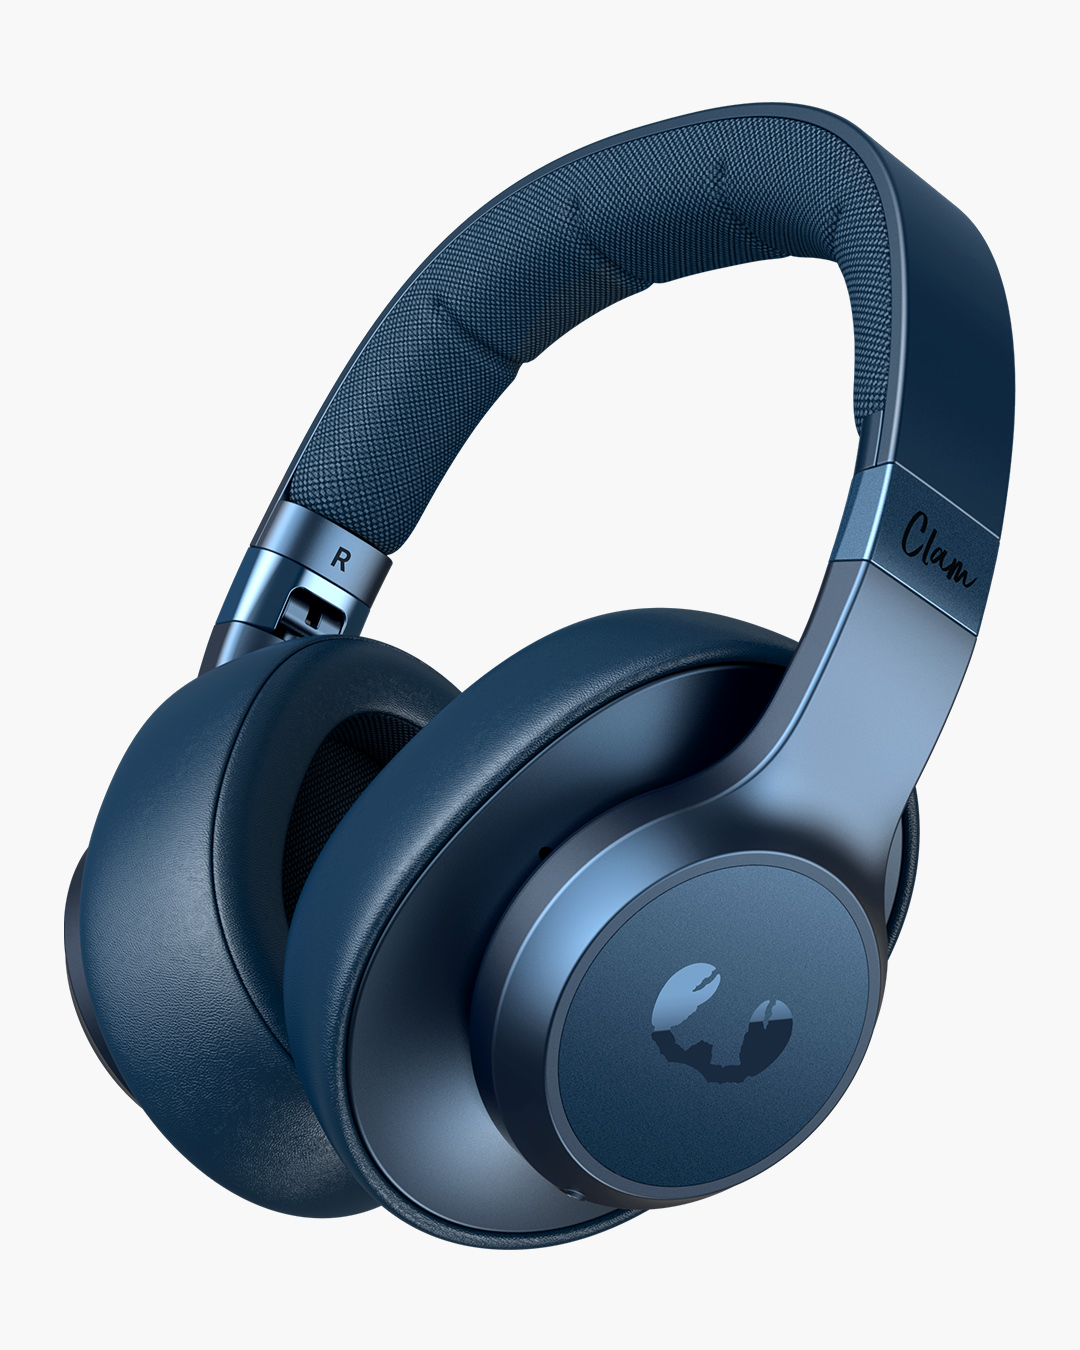 Fresh 'n Rebel - Clam ANC - Wireless over-ear headphones with active noise cancelling - Steel Blue